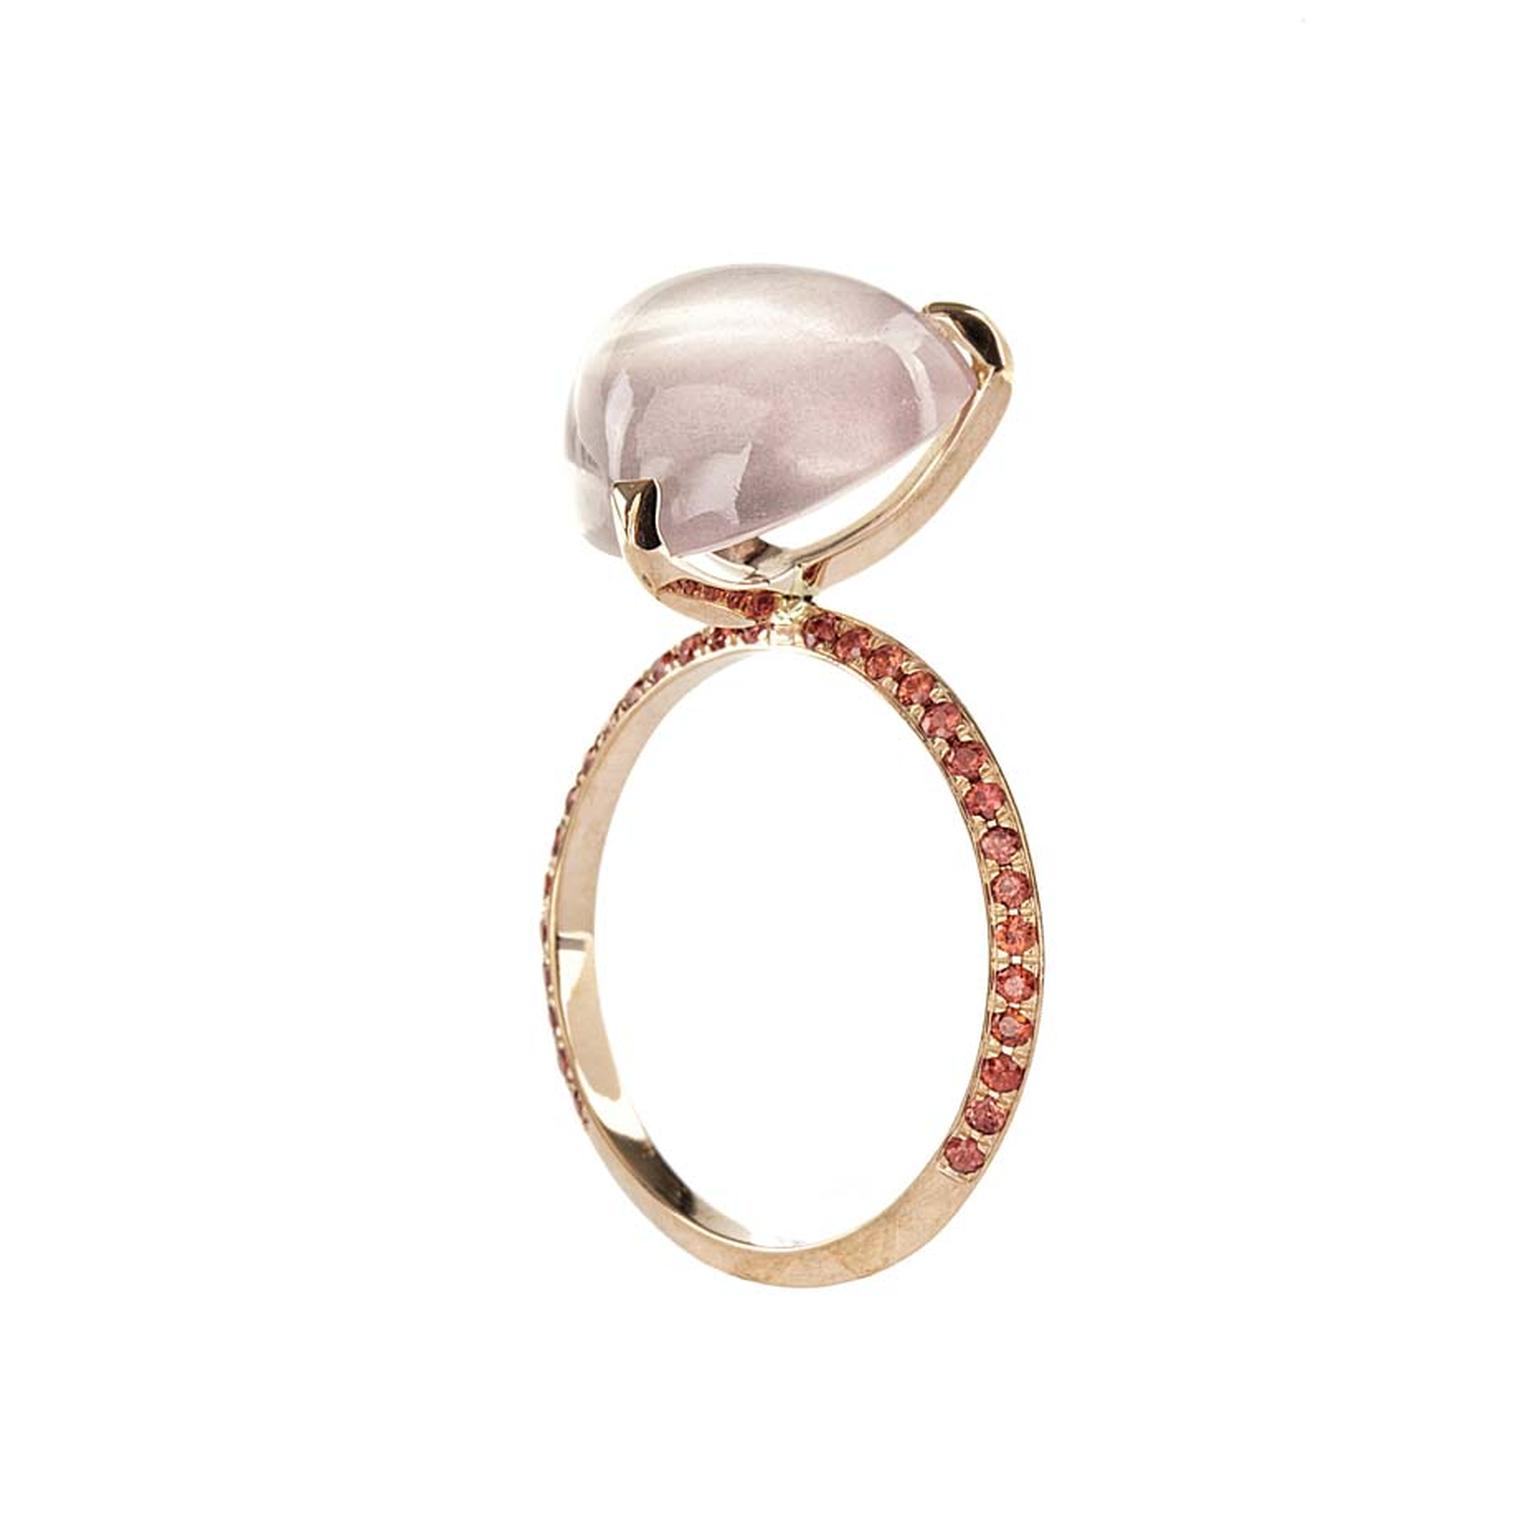 Lito pink gold ring with a 3.5ct oval cabochon rose quartz and orange brilliant-cut sapphires